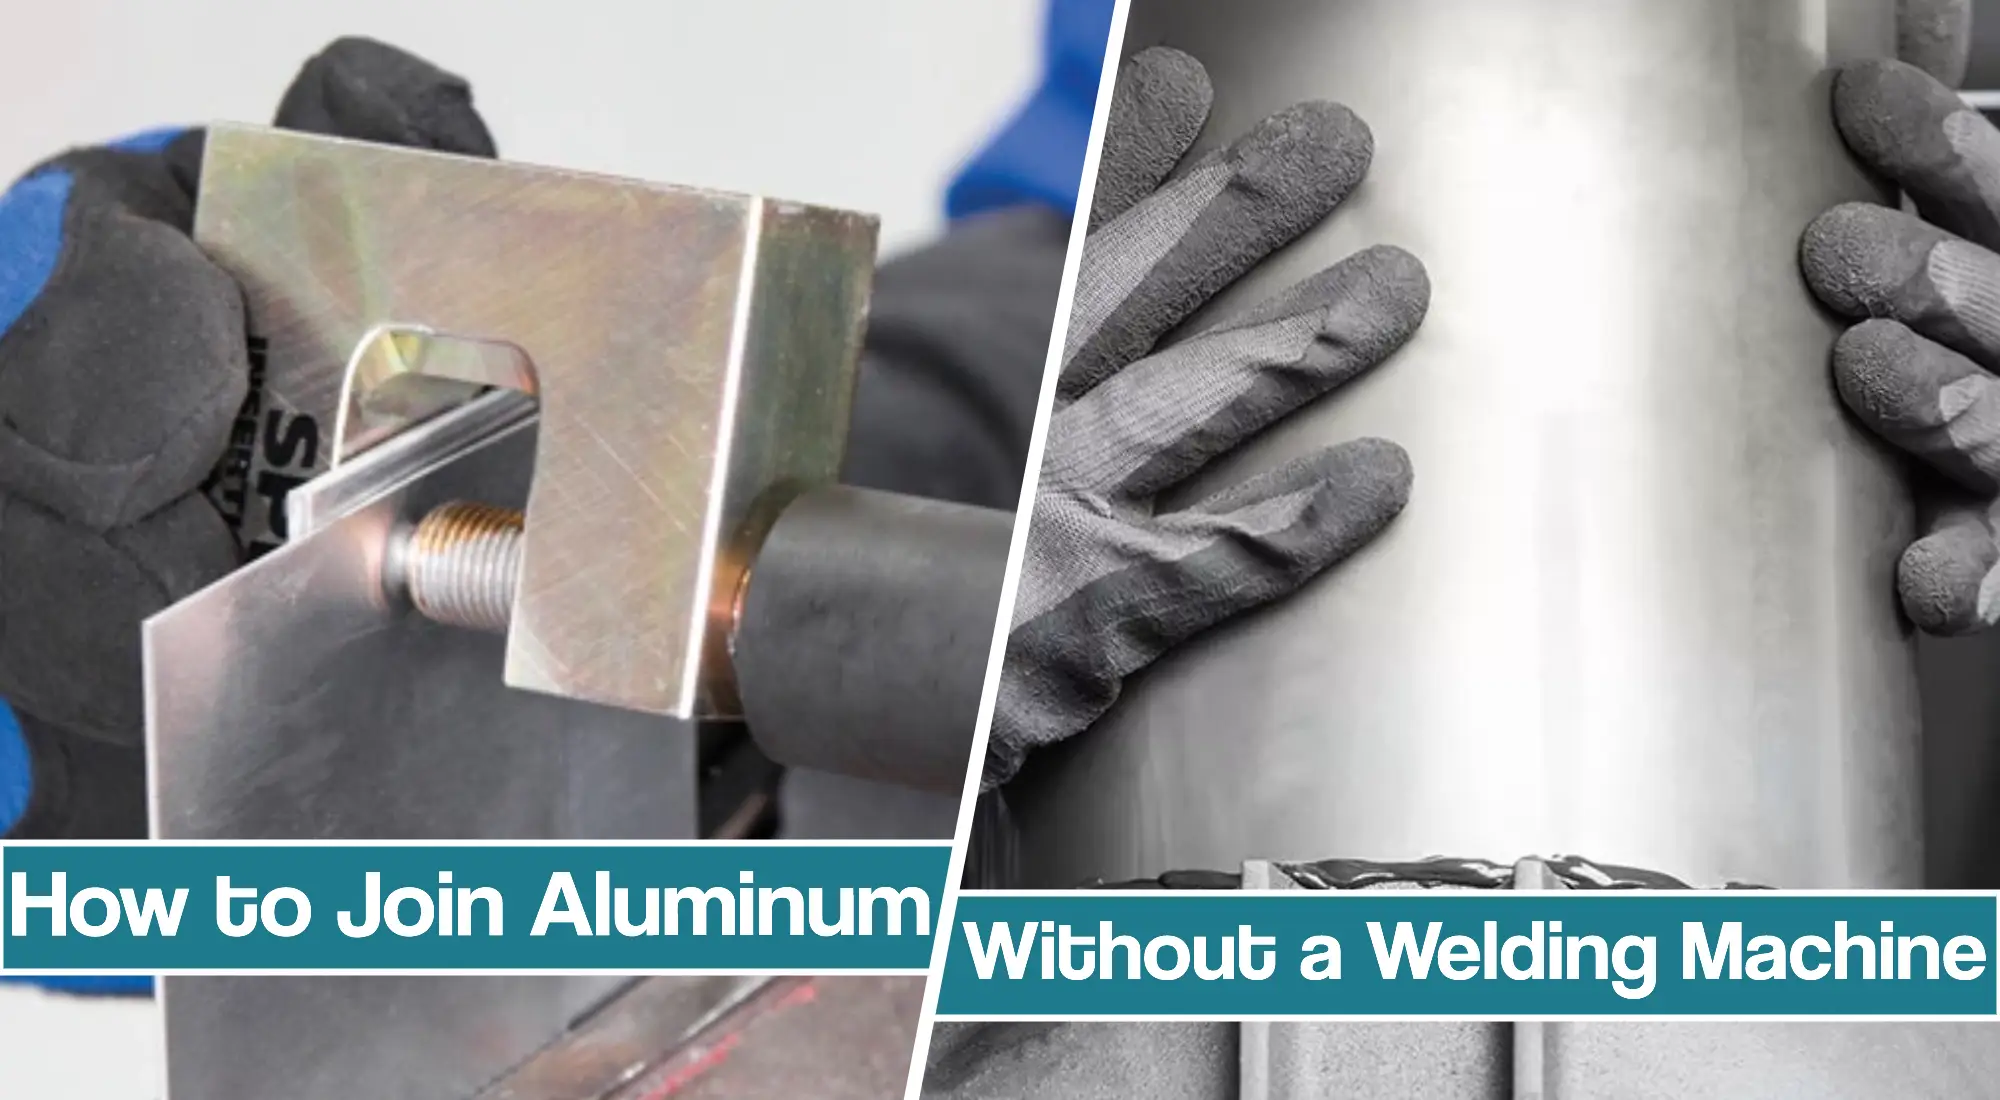 Featured image for the How To Weld Aluminum With No Welder article